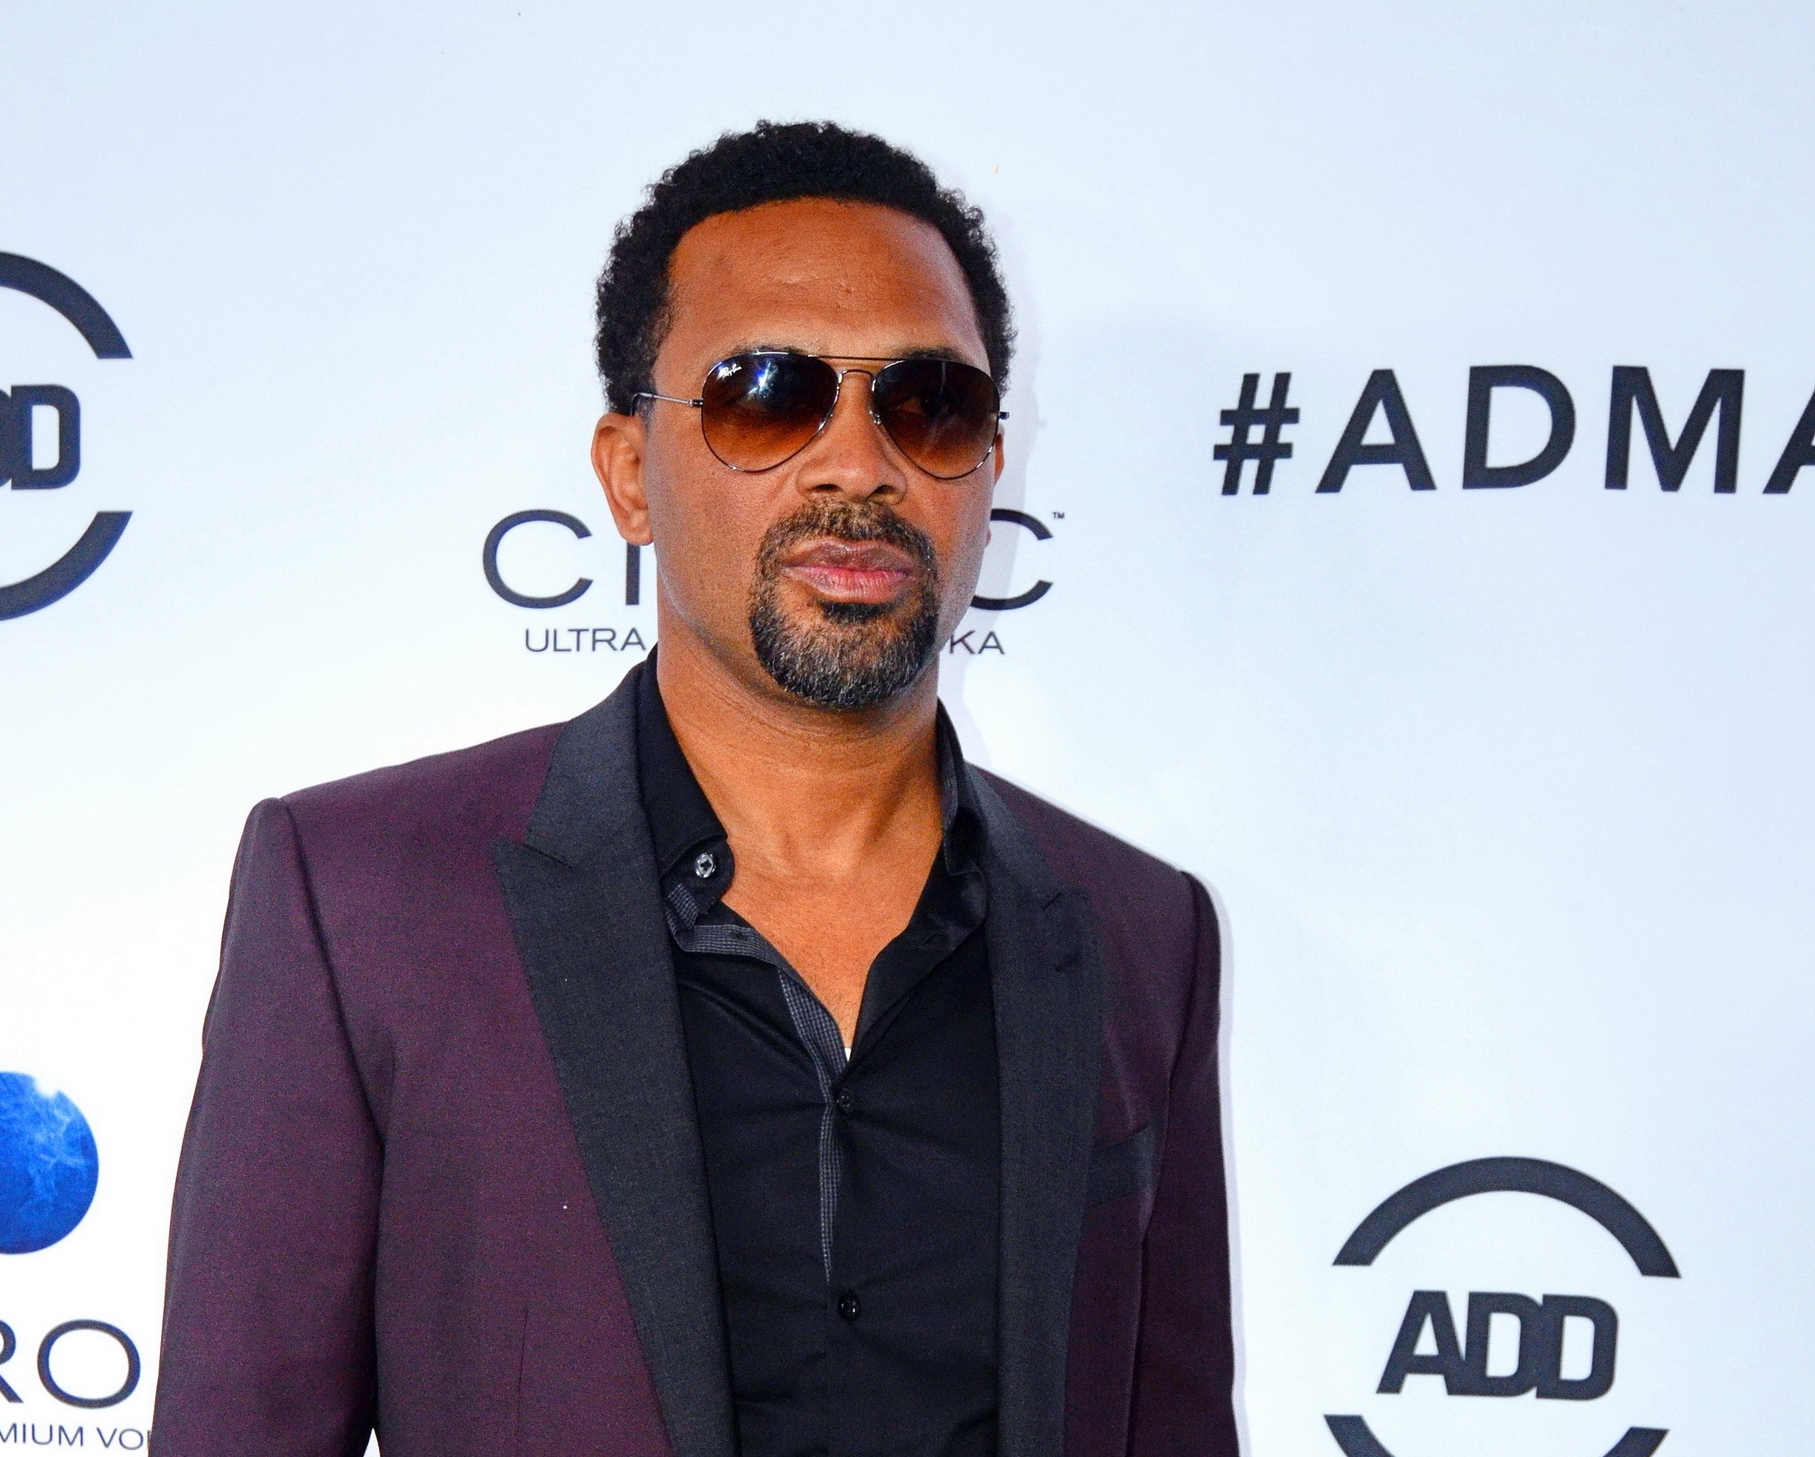 02/24/2016 - Mike Epps - 2016 All Def Movie Awards Hosted by Tony Rock - Arrivals - Lure Nightclub, 1439 Ivar Avenue - Hollywood, CA, USA - Keywords: Photography, Arts Culture and Entertainment, Celebrity, Celebrities, Person, People, All Def Movie Awards, DJ, Topix, Bestof, Lure Nightclub, Oscars So White, Hollywood, California Orientation: Portrait Face Count: 1 - False - Photo Credit: Sir Jones / PRPhotos.com - Contact (1-866-551-7827) - Portrait Face Count: 1